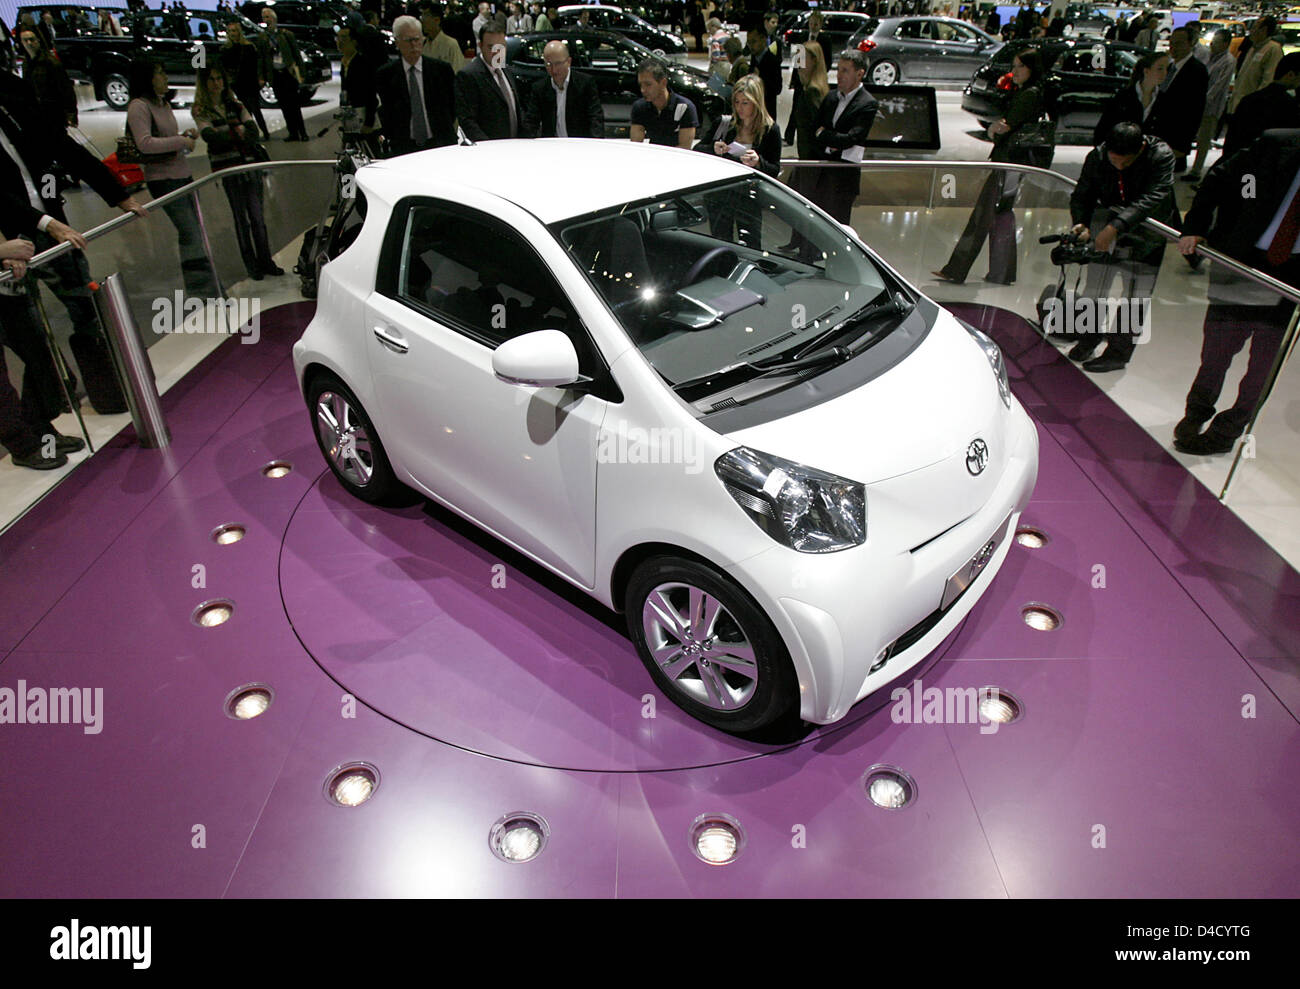 The new Toyota IQ is presented during the second press day at the 78th International Motor Show Geneva, Switzerland, 05 March 2008. Some 260 exhibitors from 30 nations showcase on 77,550 square metres their latest developments at the 78th International Motor Show Geneva running from 06 through 16 March. Photo: ULI DECK Stock Photo